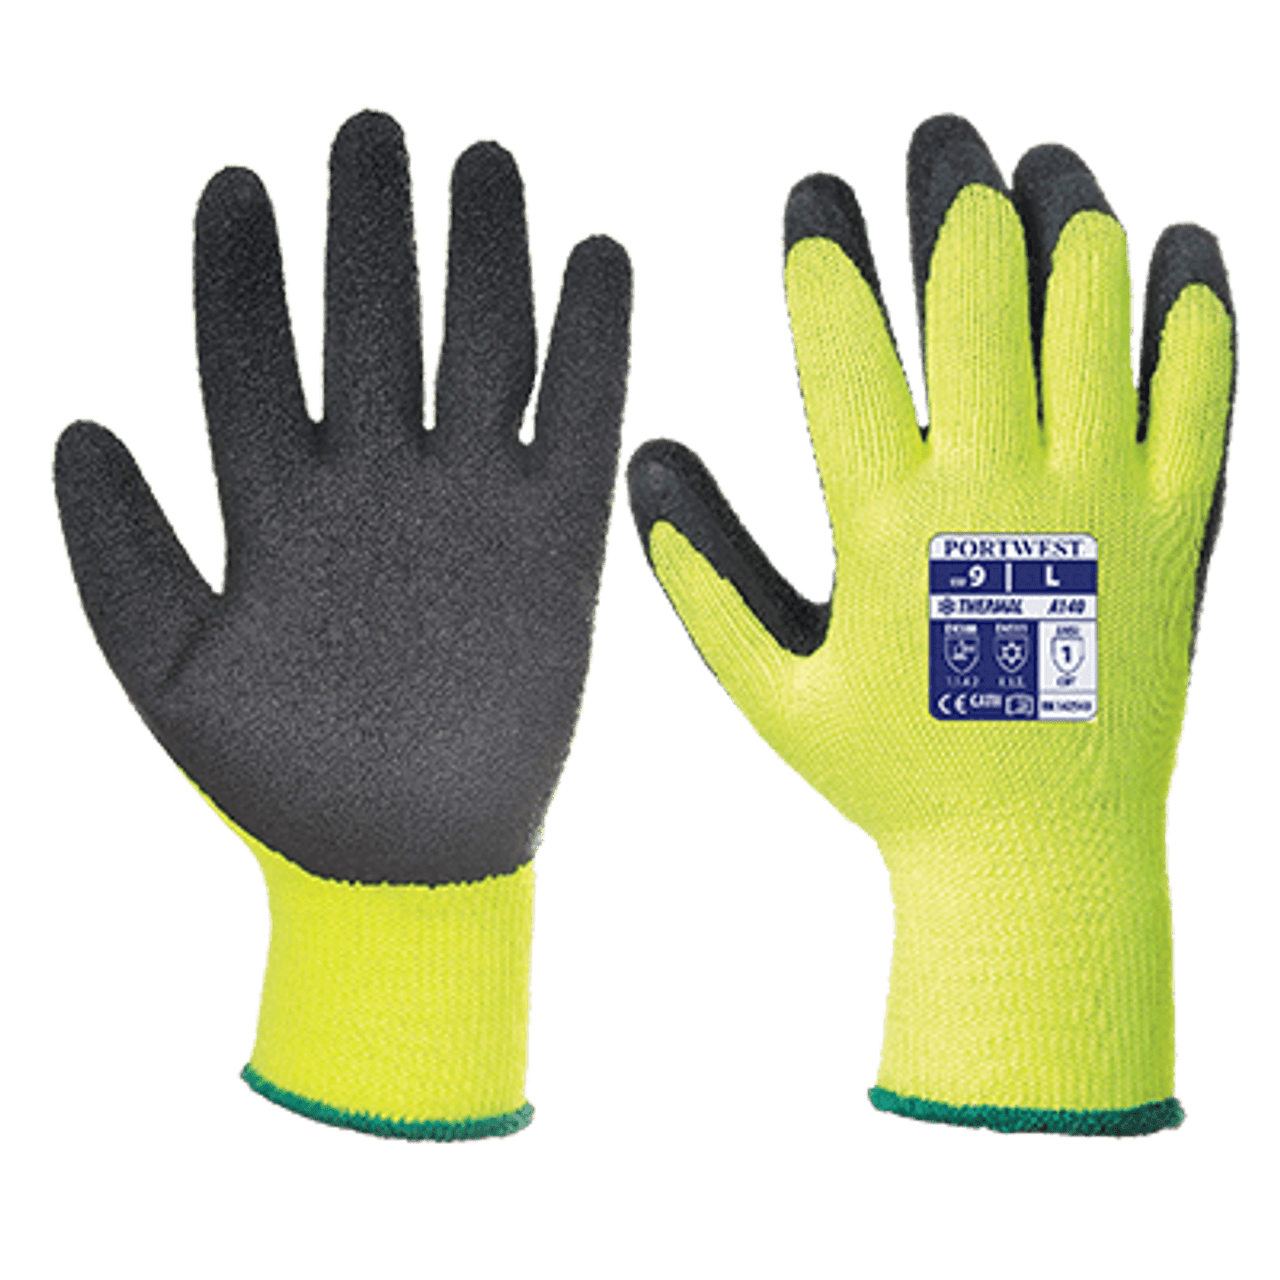 https://cdn11.bigcommerce.com/s-10c6f/images/stencil/1280x1280/products/3034/6353/A140BKR-Thermal_Grip_Glove__32309.1598390555.png?c=2